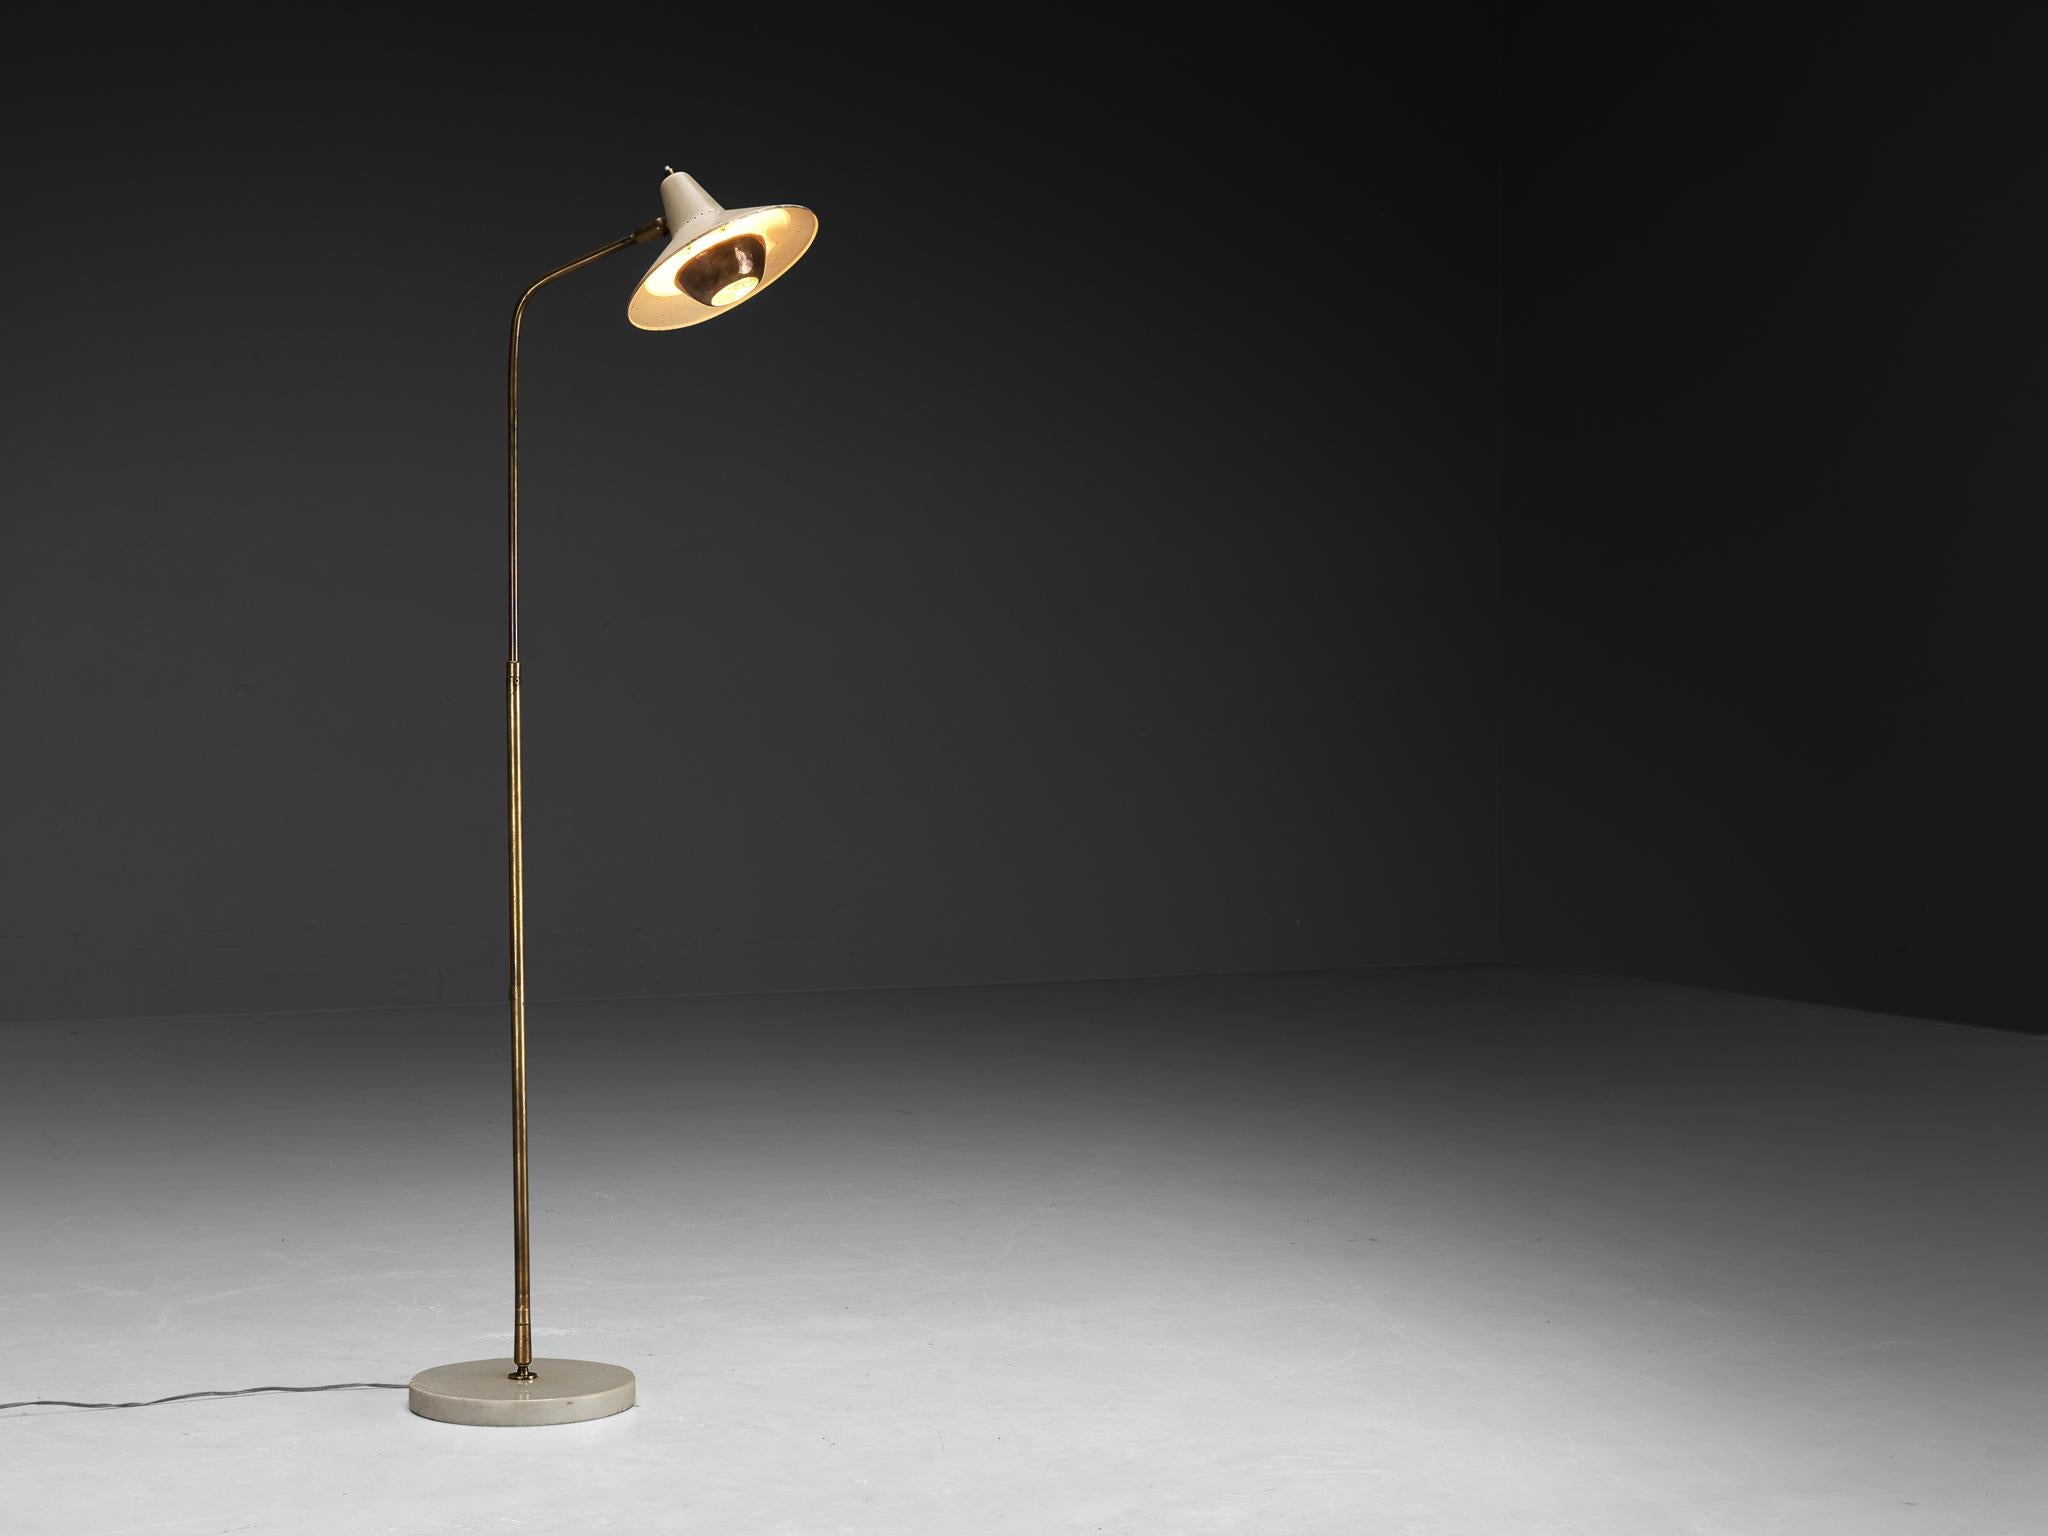 Angelo Ostuni for O-Luce, ‘Cloche Mignon’ floor lamp, model ‘312’, brass, marble, enameled aluminum Italy, 1949

This floor lamp known as, ‘Cloche Mignon’, meaning cute bell in French, is designed by the influential designer in the field of lighting